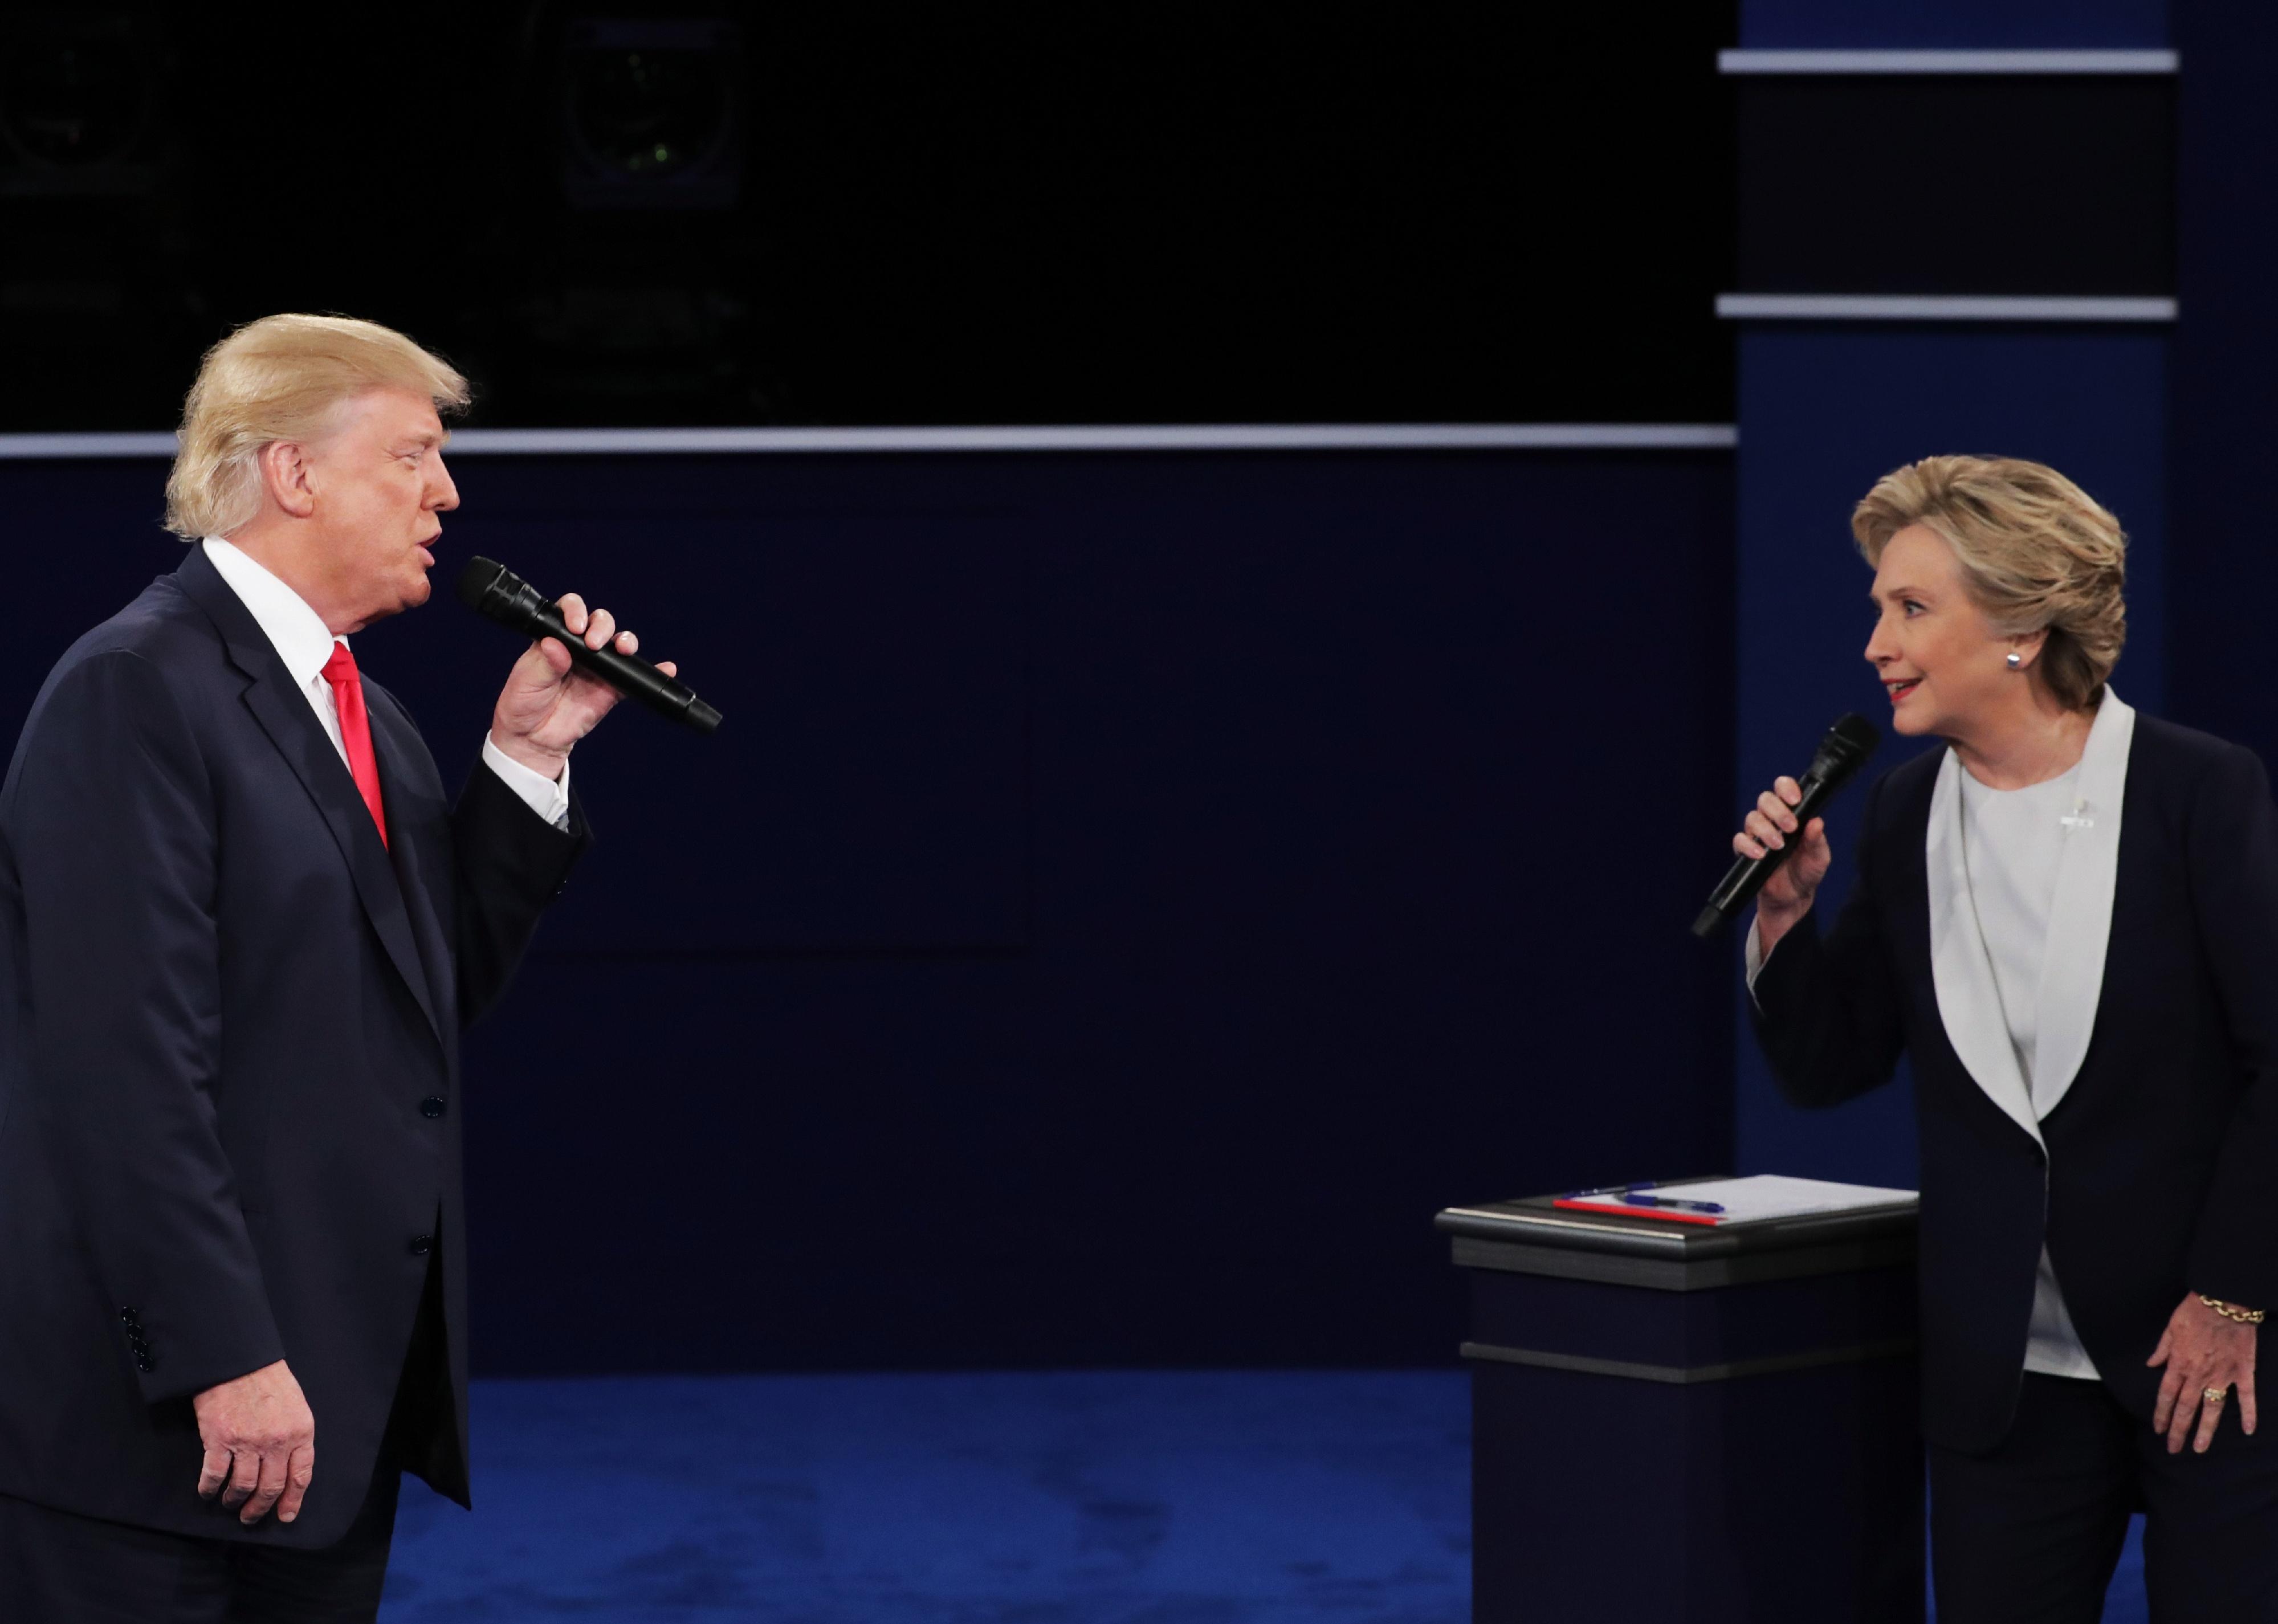 Donald Trump and Hillary Clinton speak during a debate onstage.